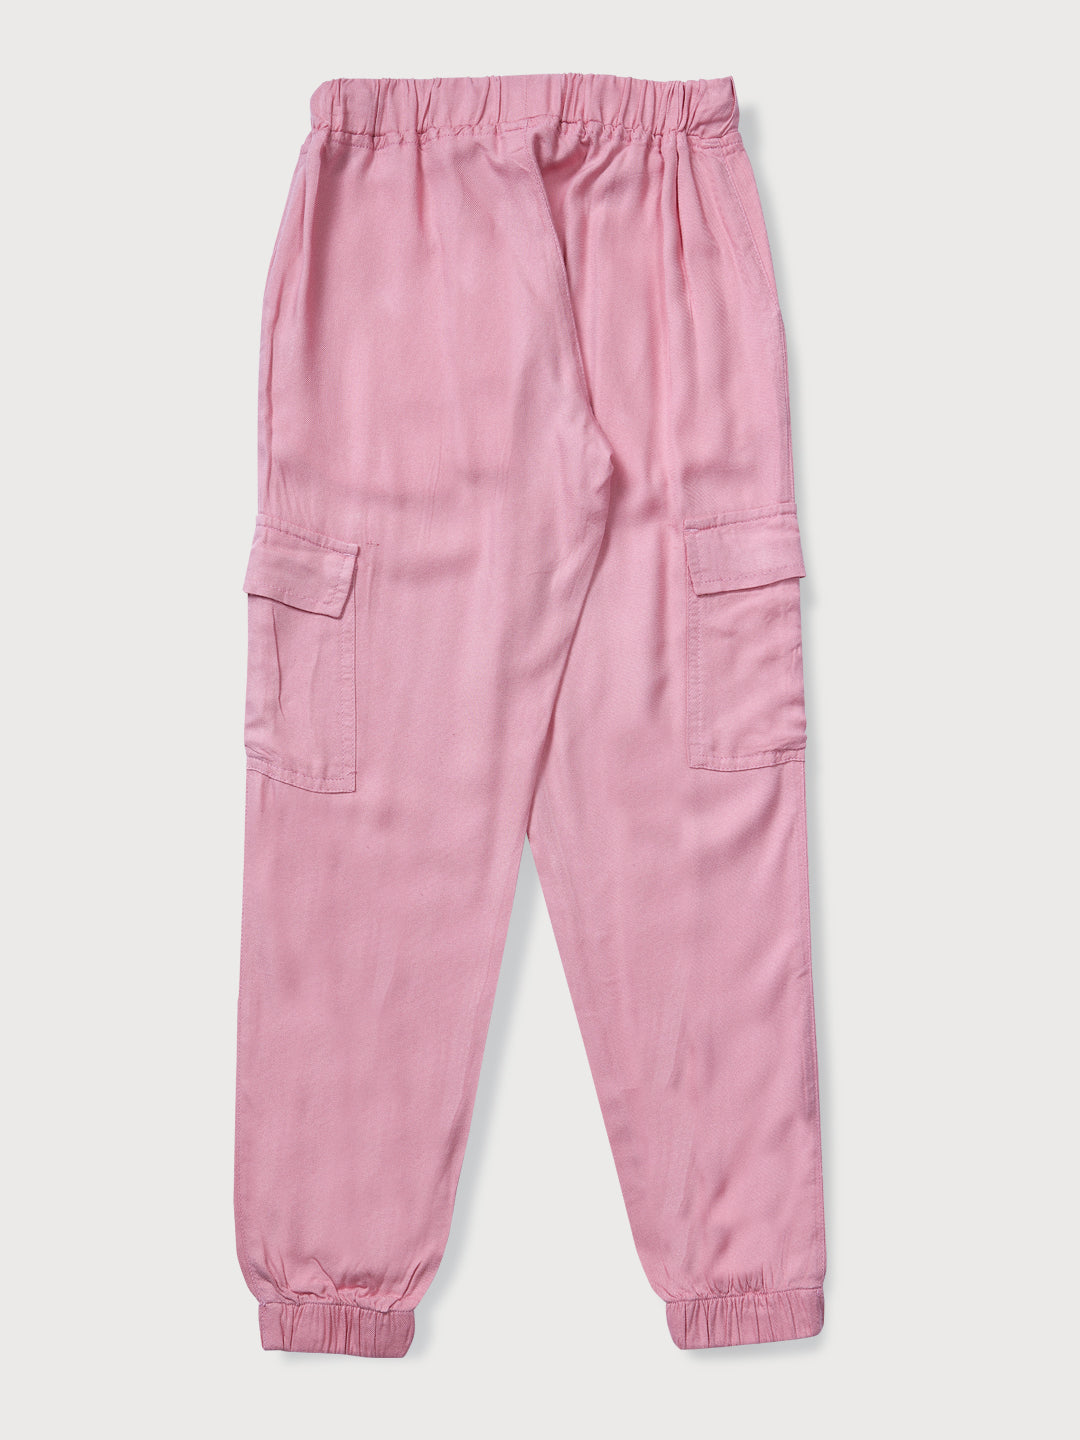 Girls Pink Solid Woven Joggers